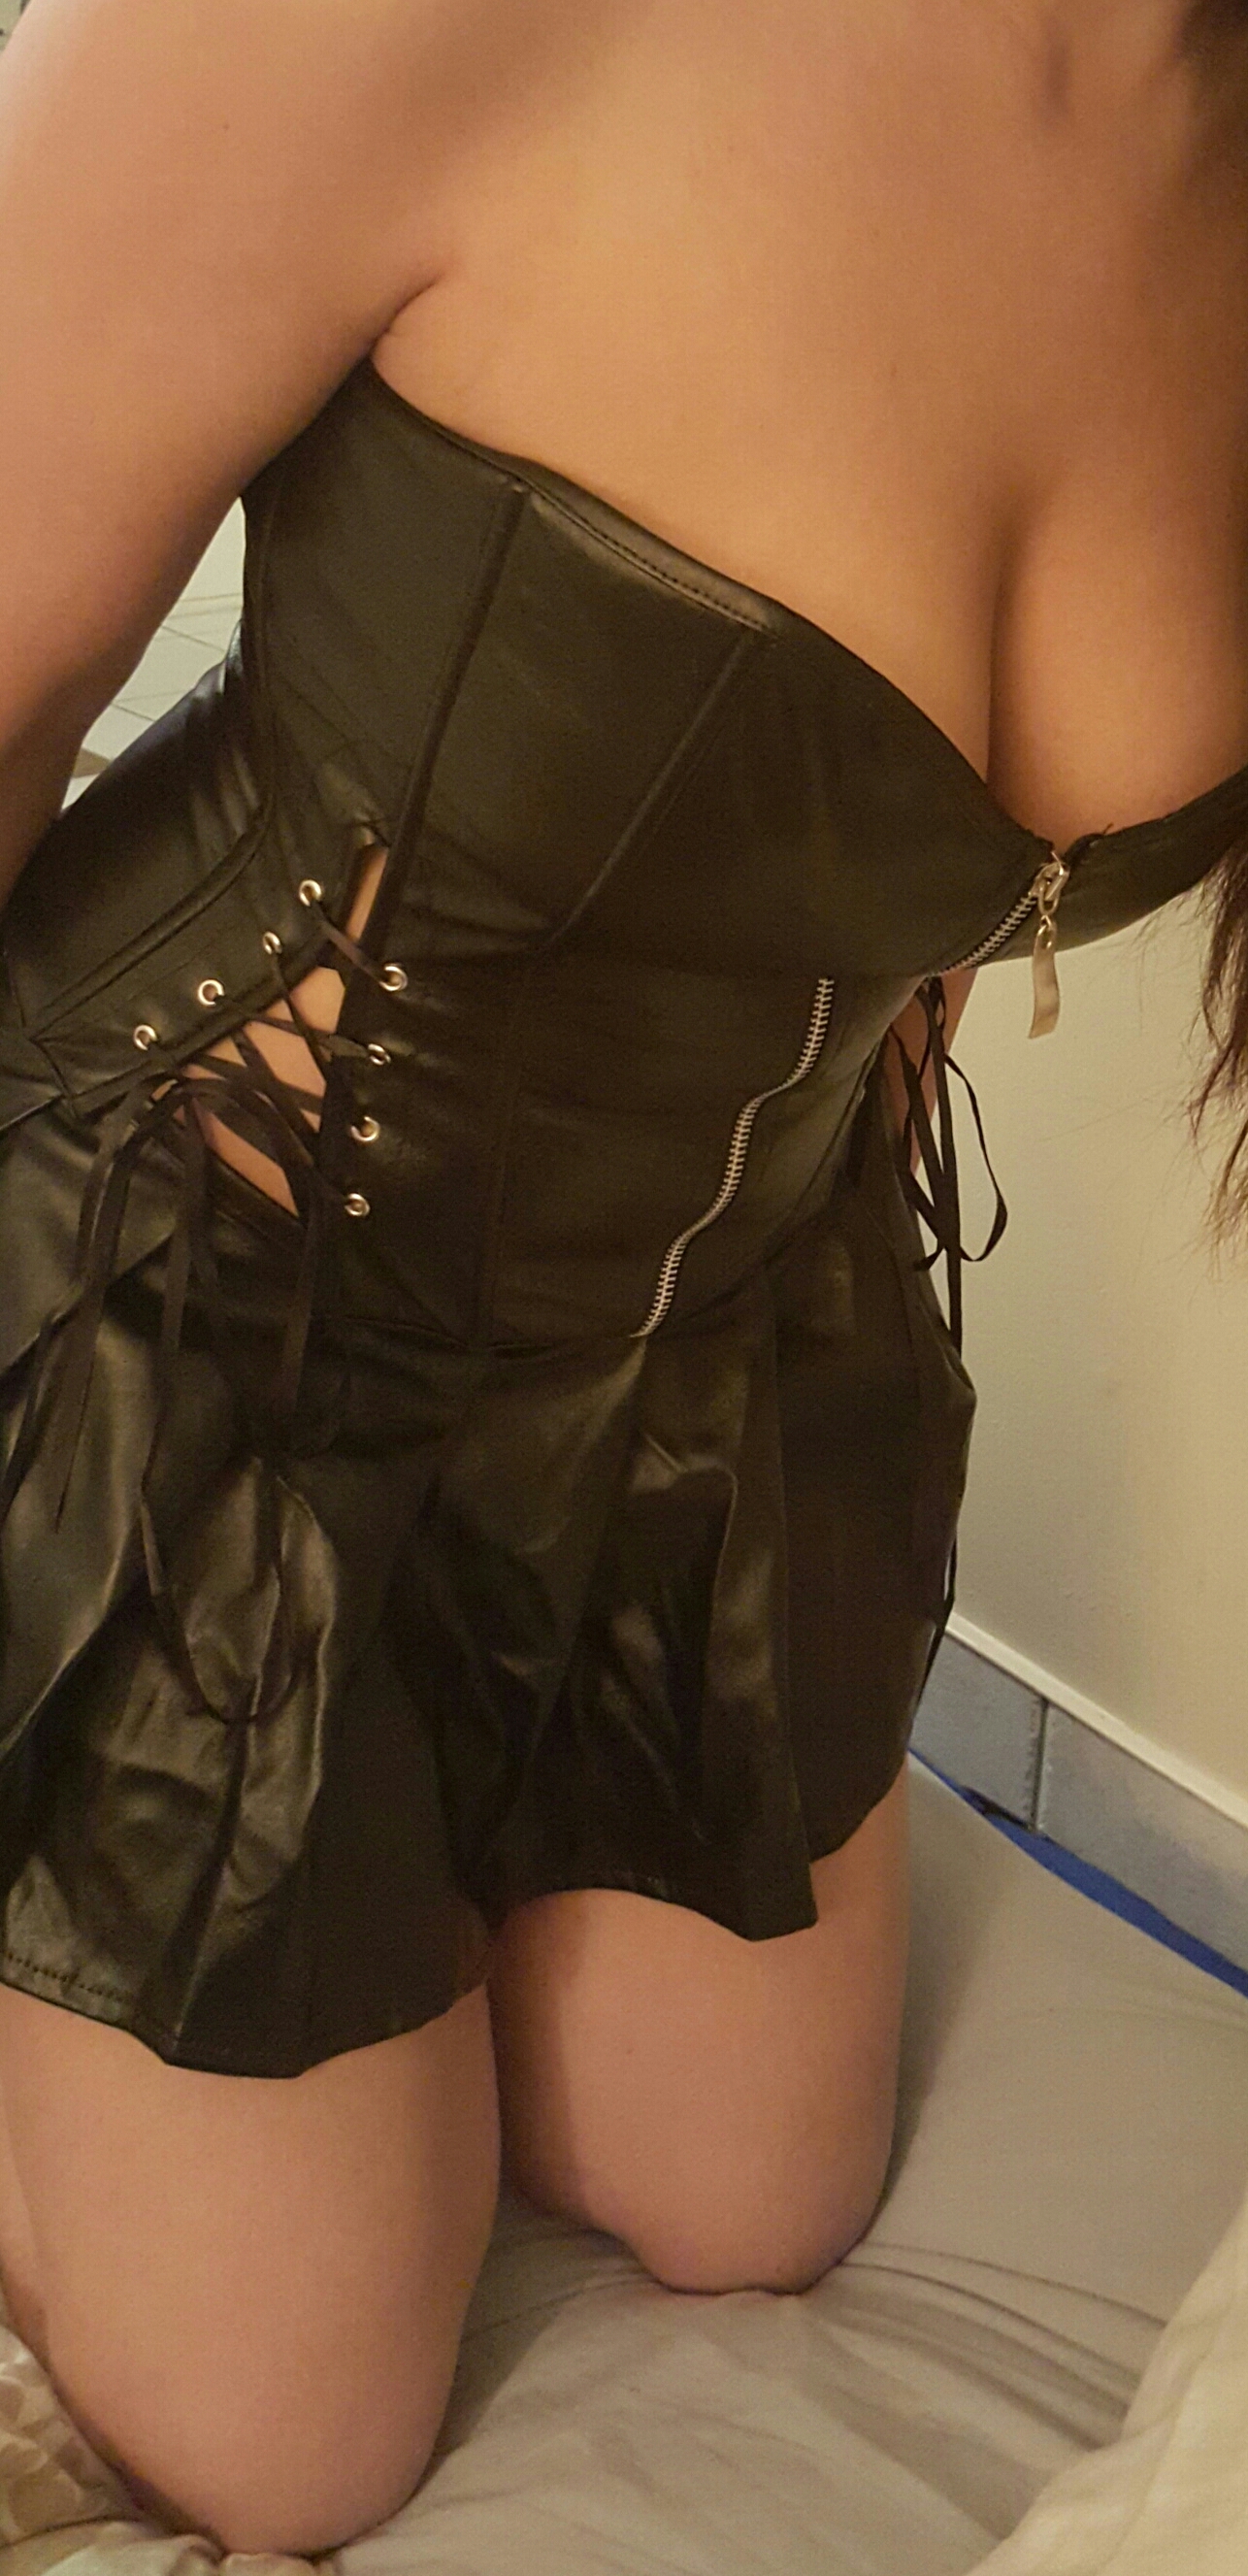 best of Hotwife leather